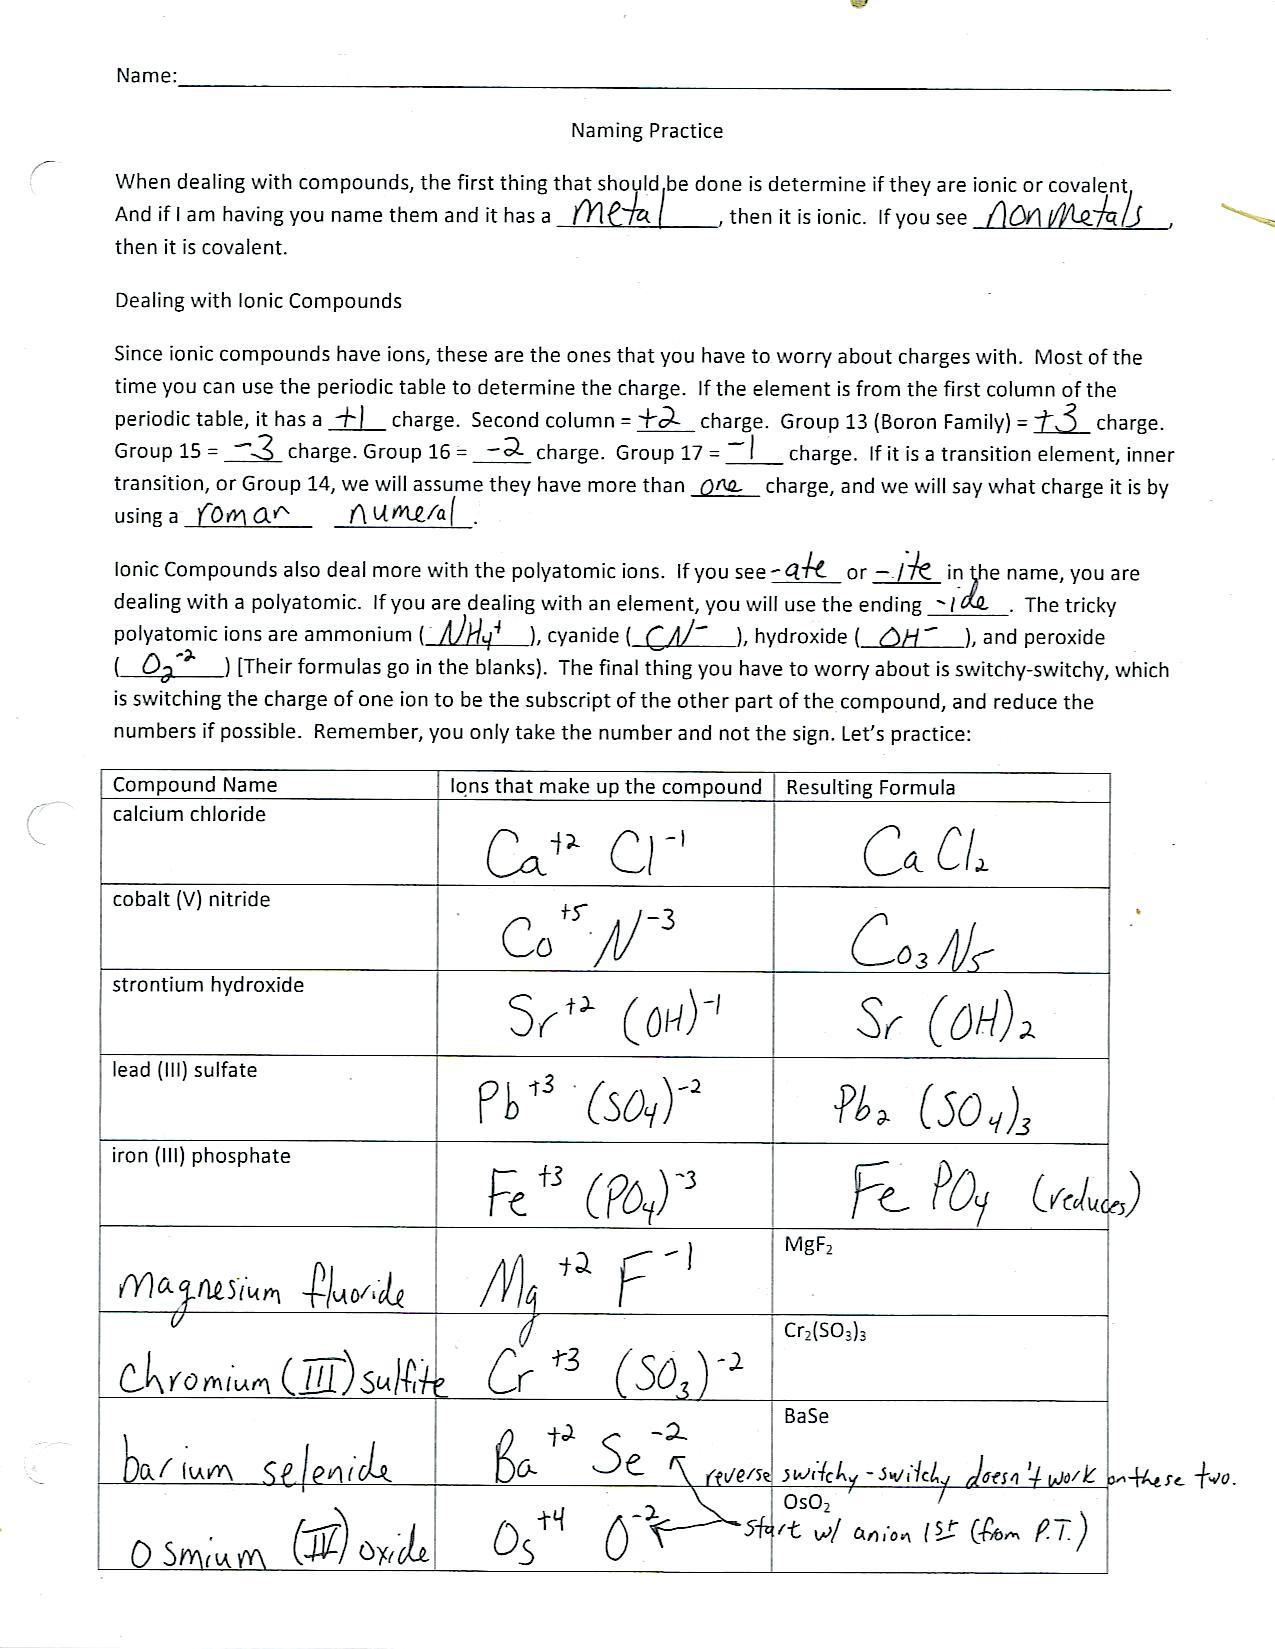 Ionic Bonding Lewis Dot Structure Worksheet Answers